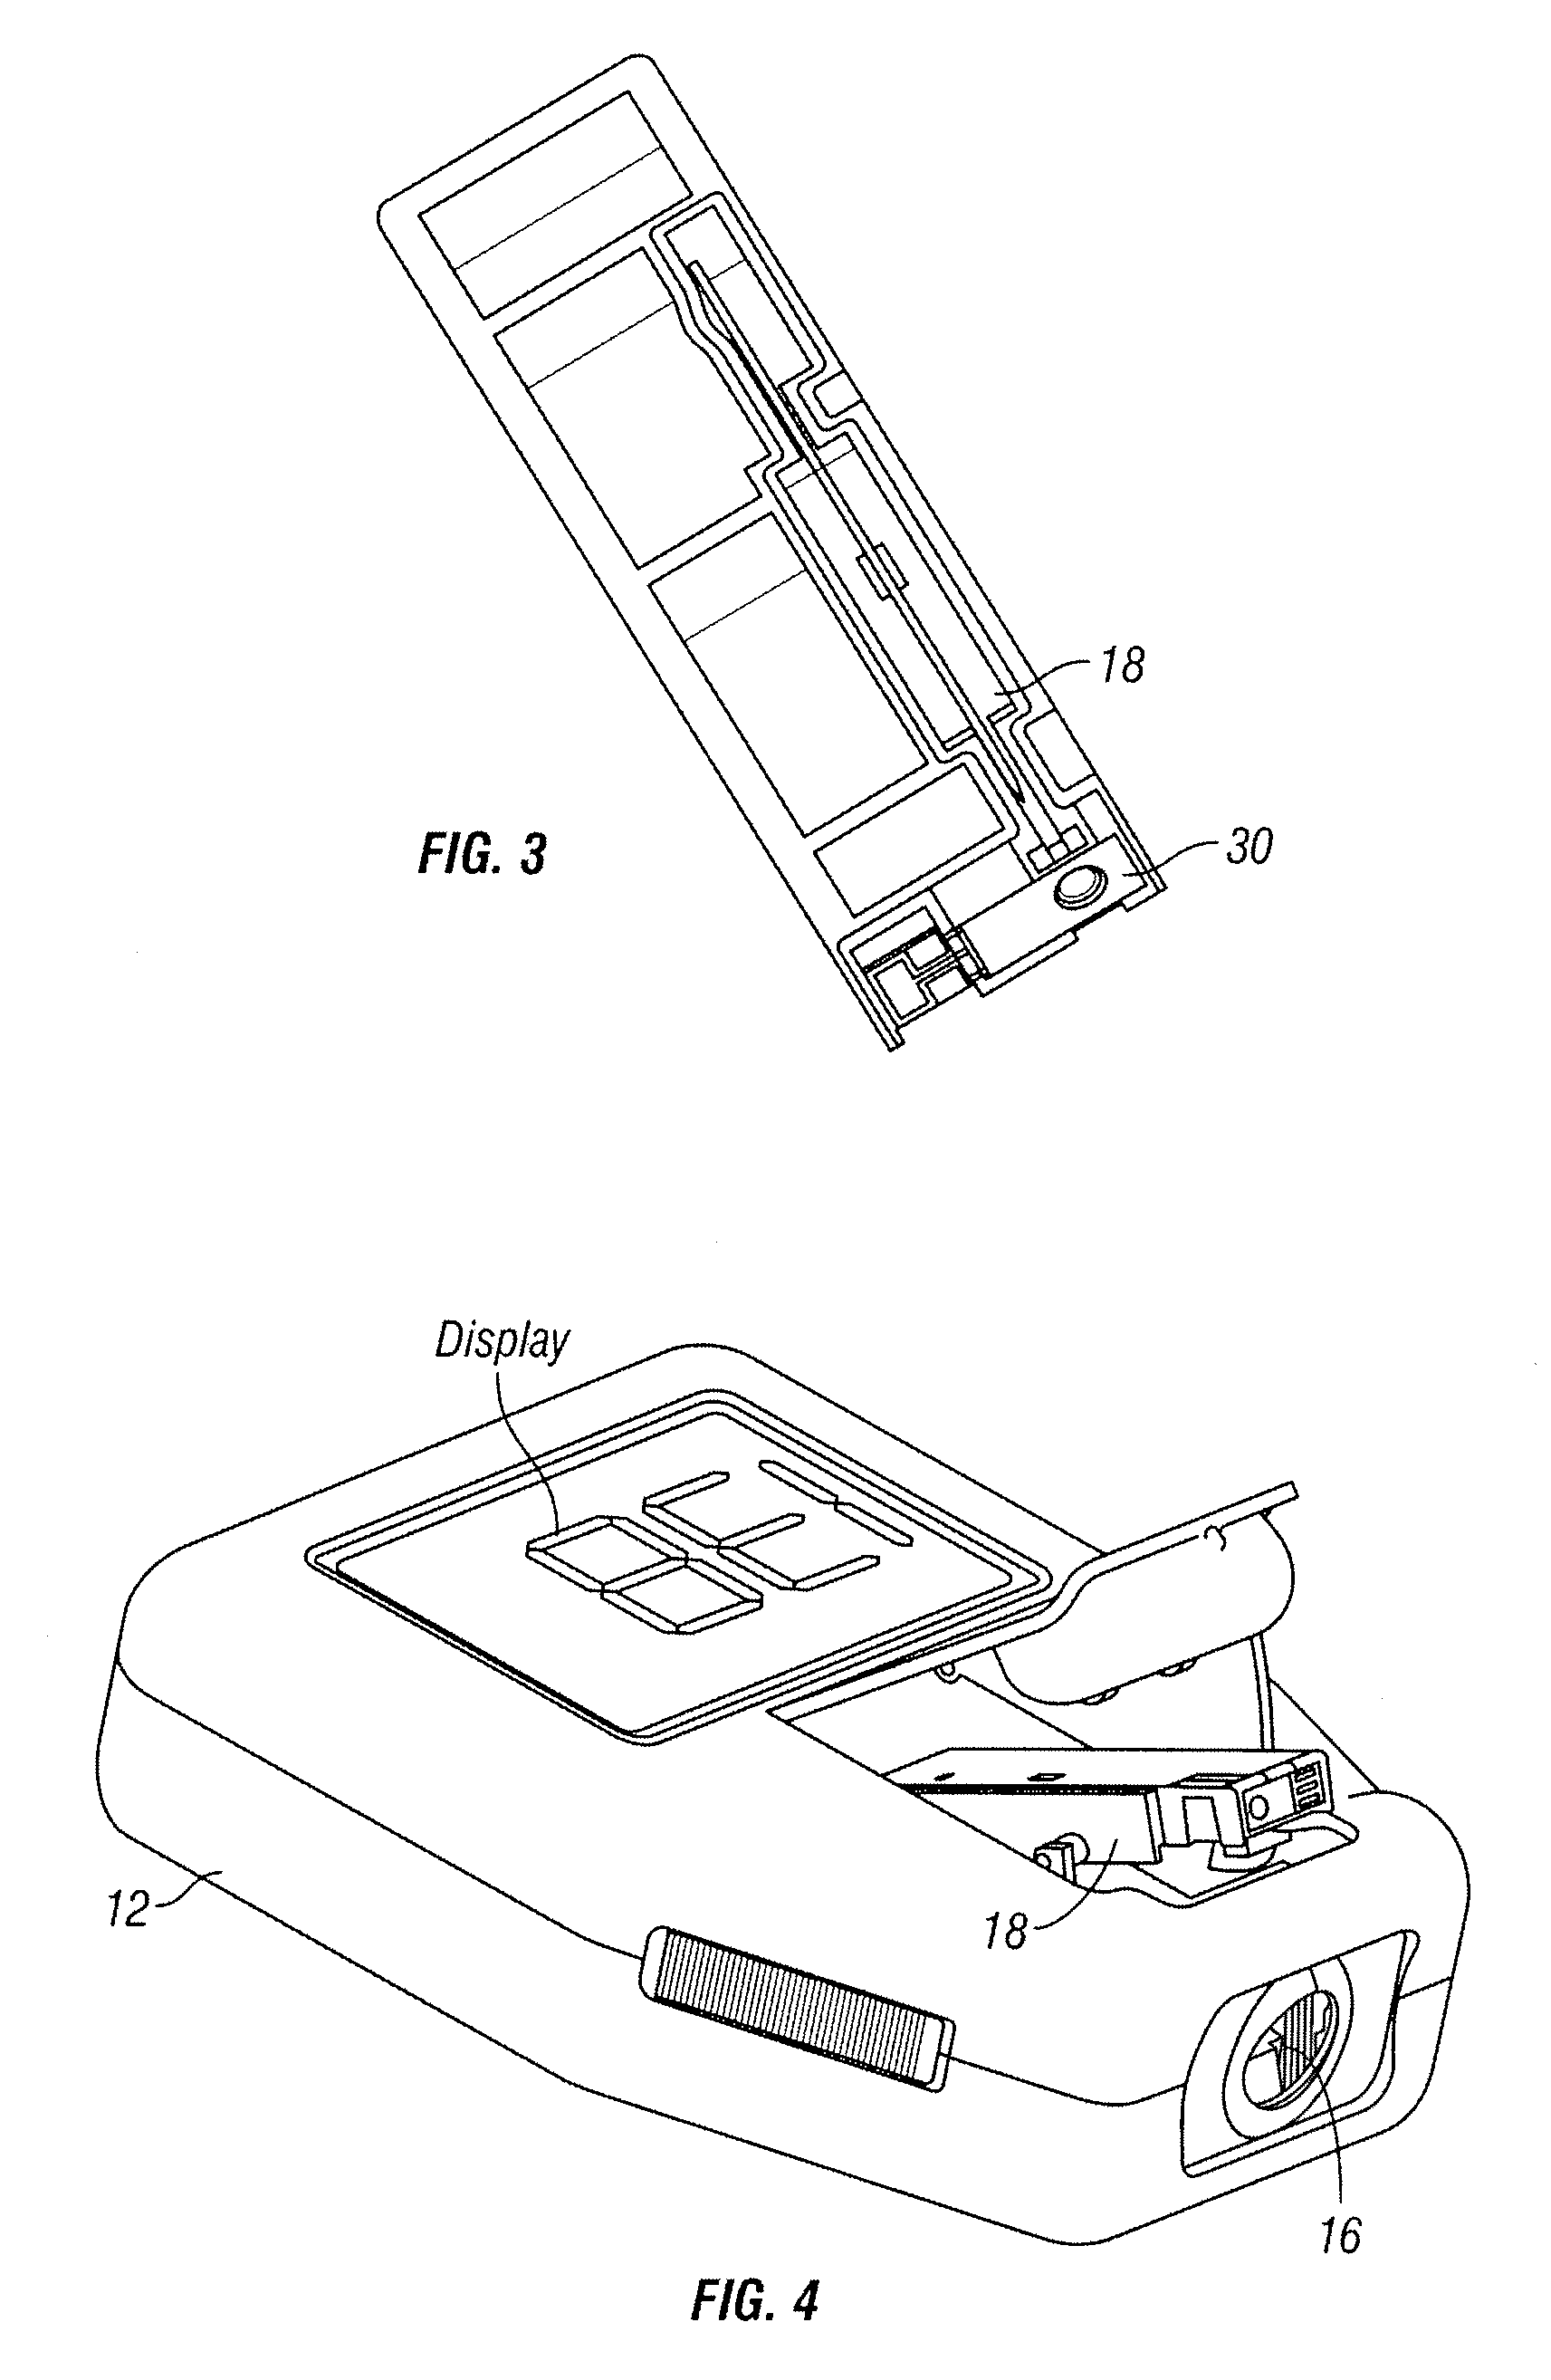 Analyte measurement device with a single shot actuator